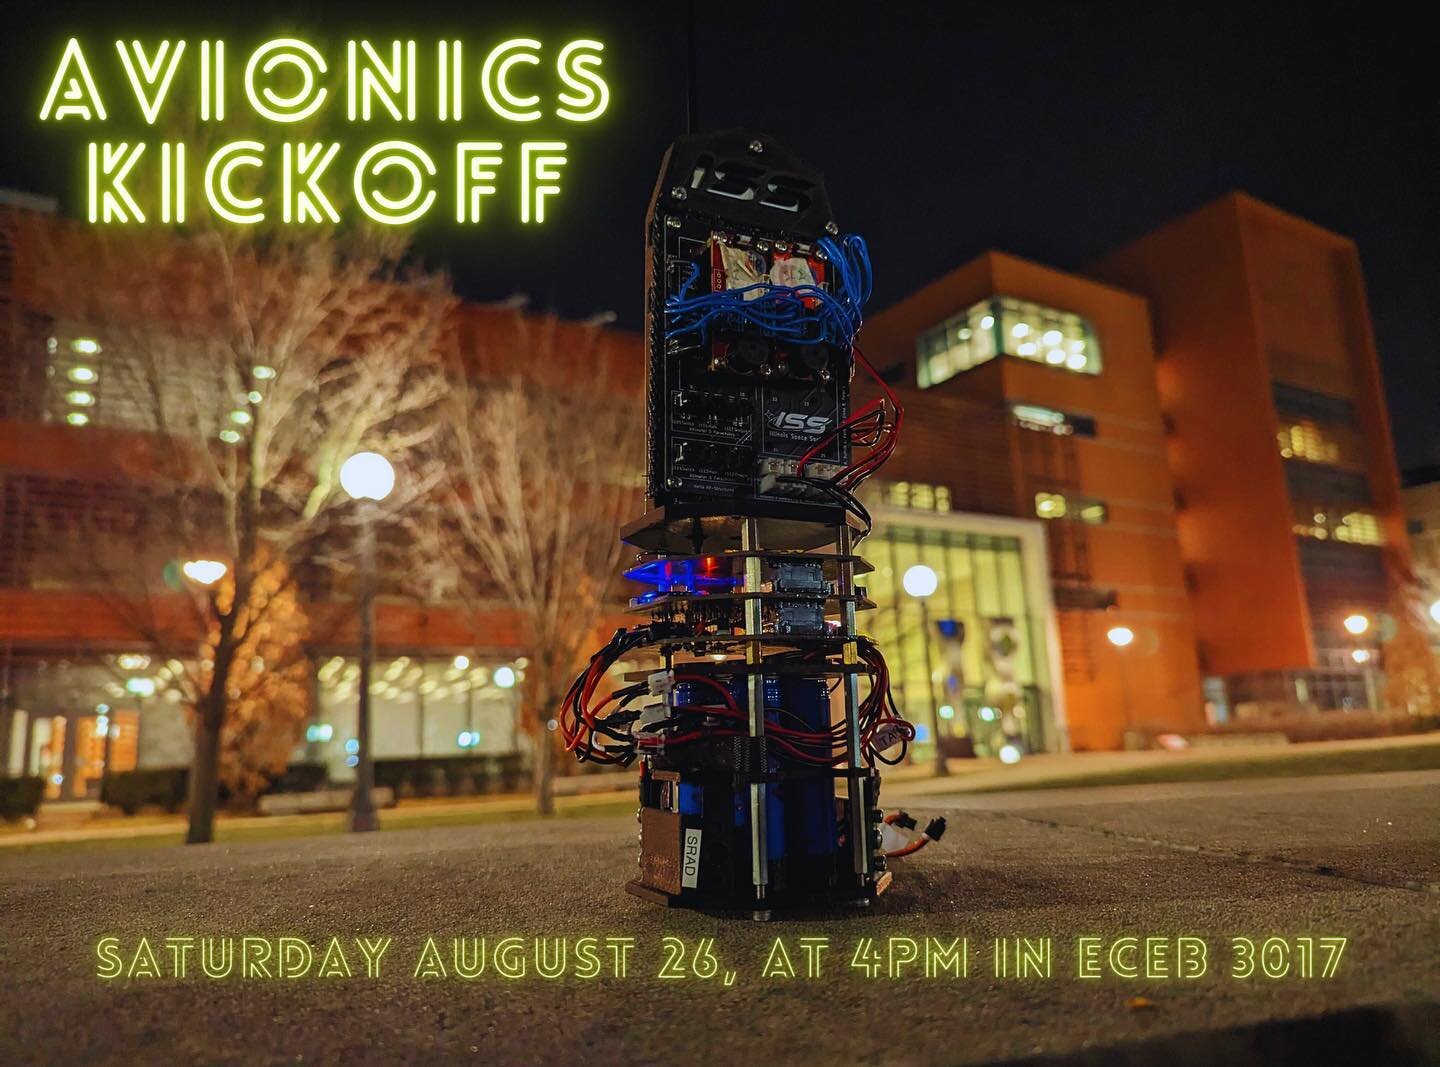 Come join us for the first Spaceshot Avionics meeting of the semester. Learn more about our team, our work, and future endeavors! See you Saturday August 26 at 4pm in ECEB 3017🔥🔥